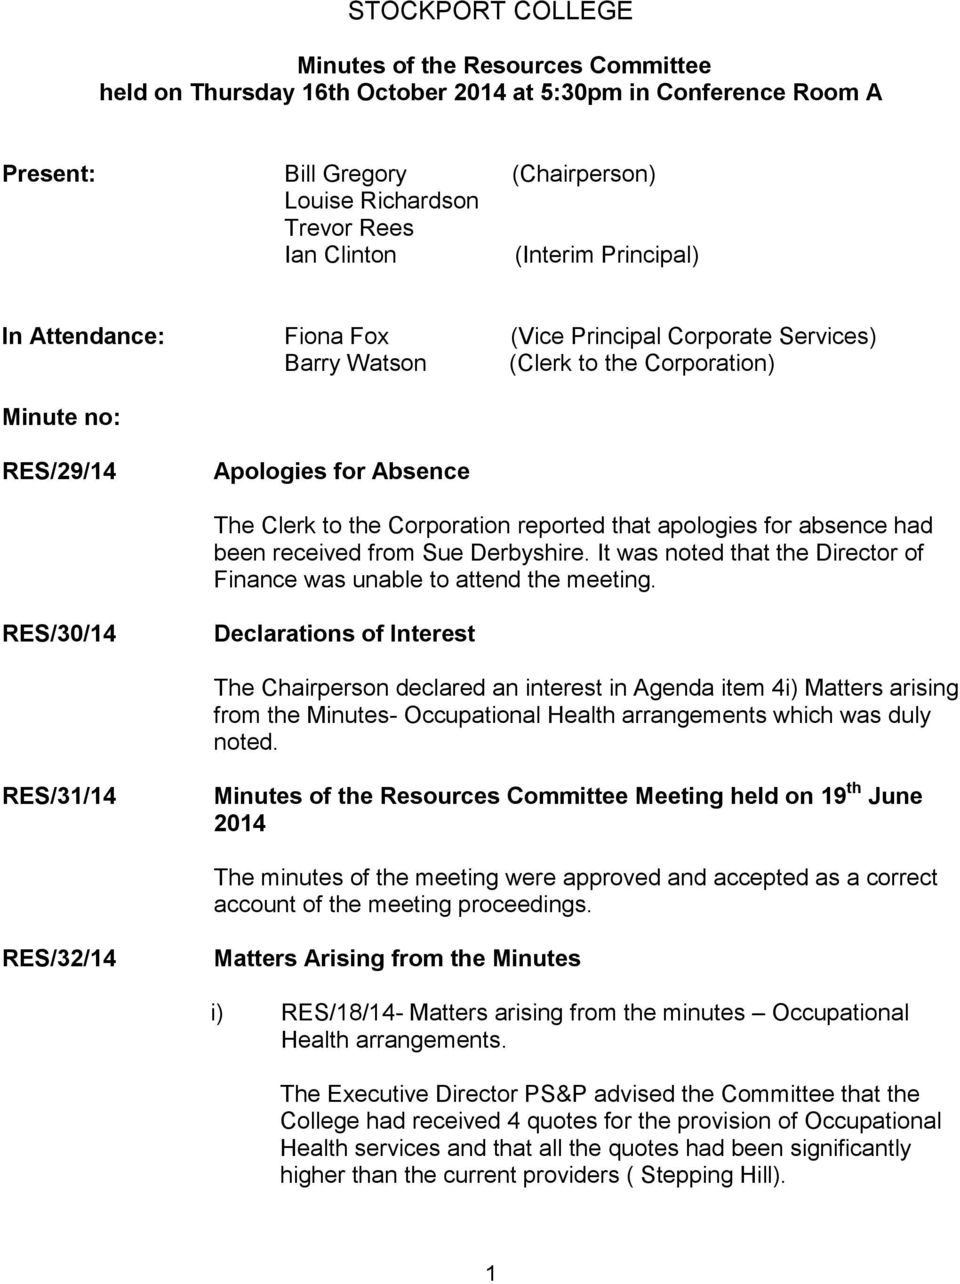 reported that apologies for absence had been received from Sue Derbyshire. It was noted that the Director of Finance was unable to attend the meeting.